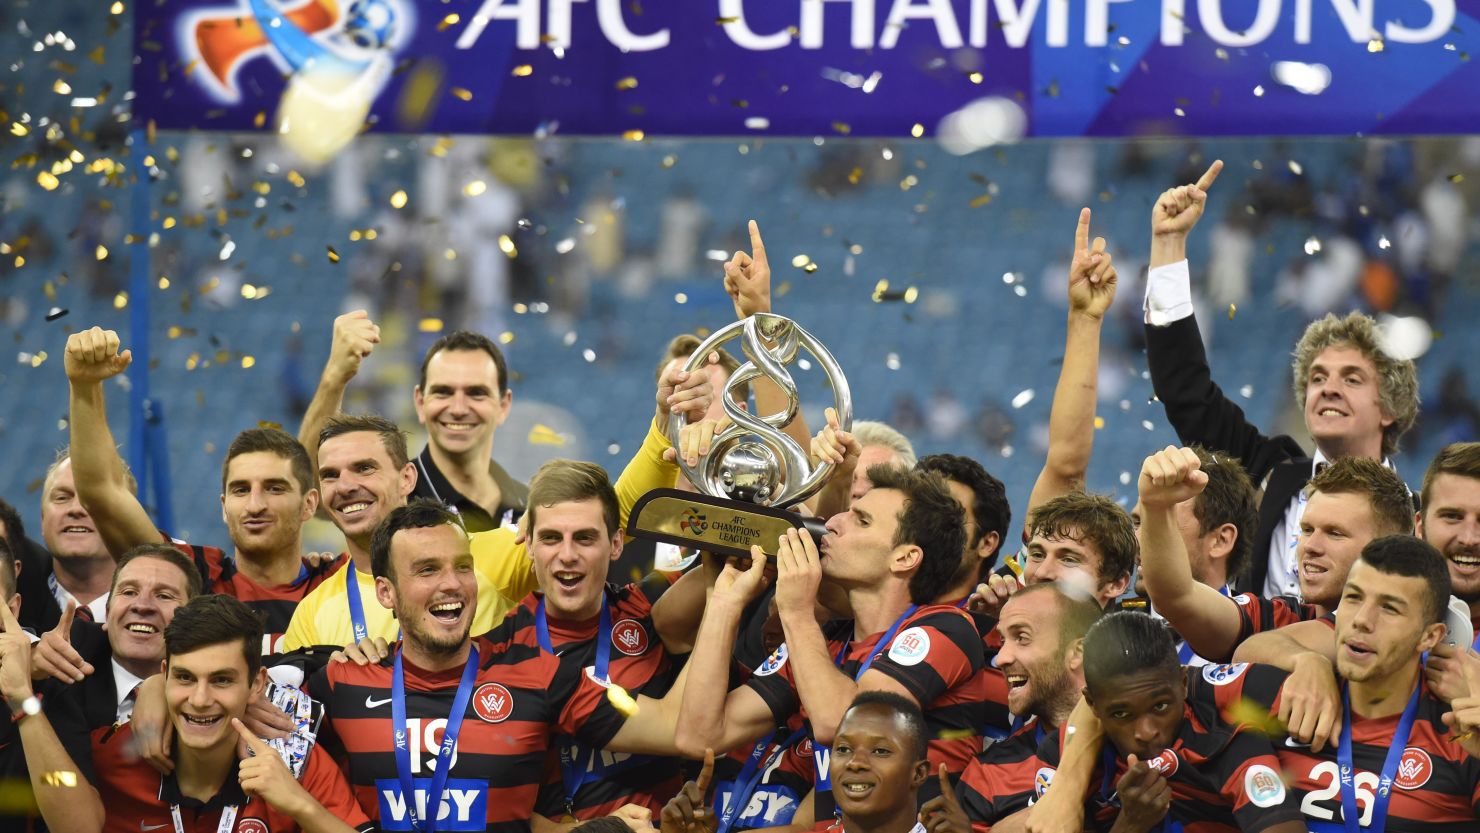 Western Sydney Wanderers players celebrate after winning the 2014 Asian Champions League.